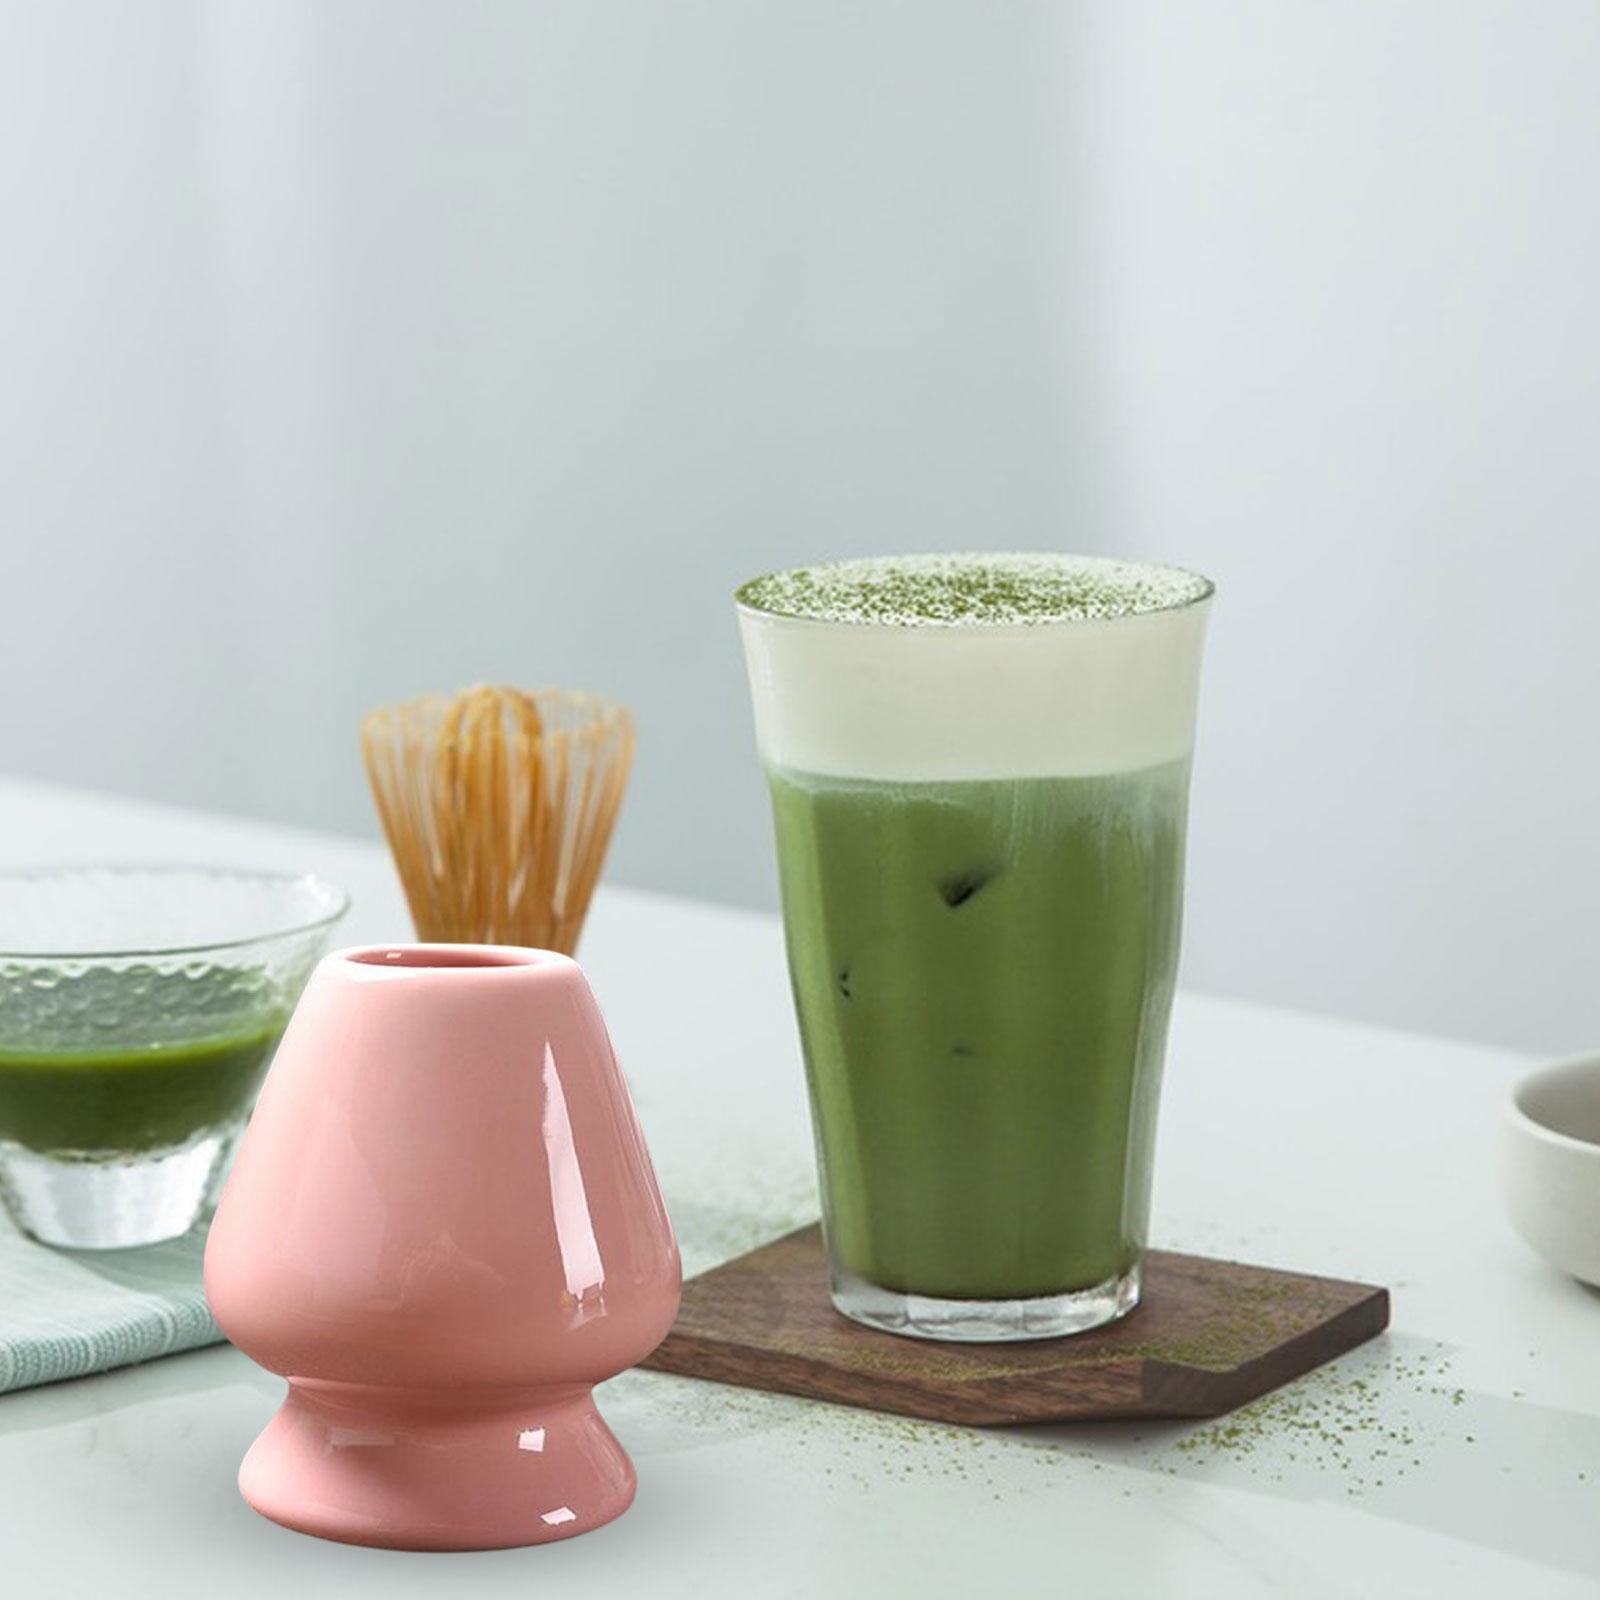 Protect Your Matcha Whisk With a Stand